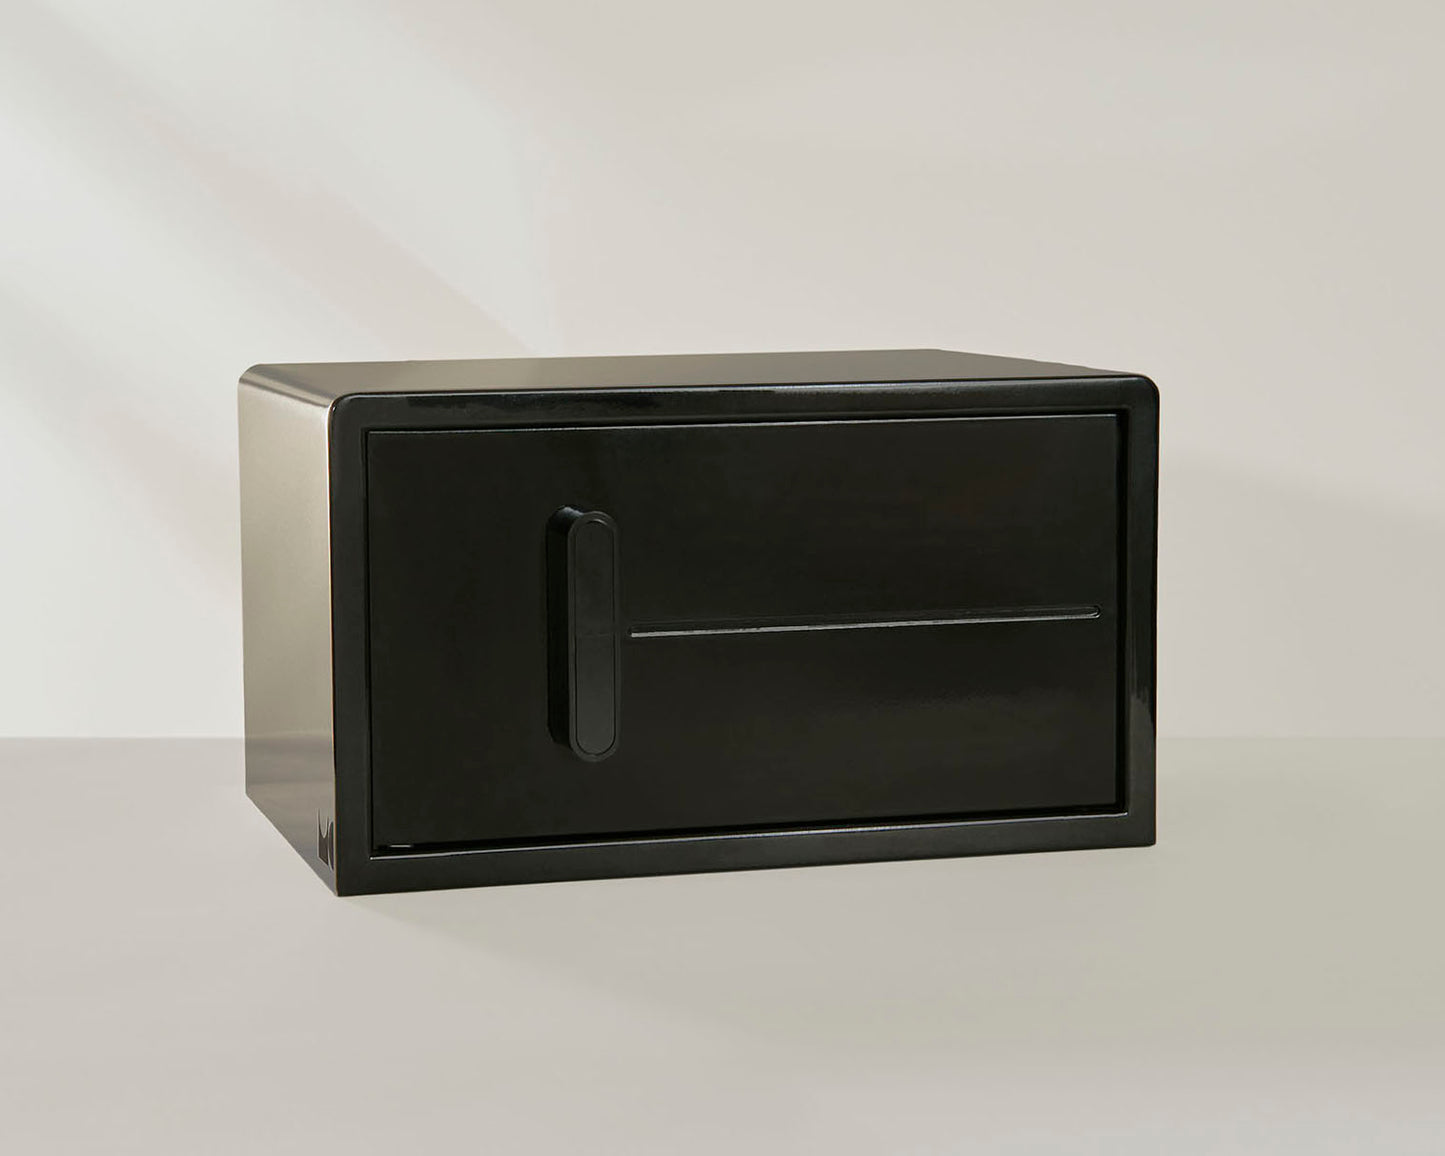 An angled image of the black iCube